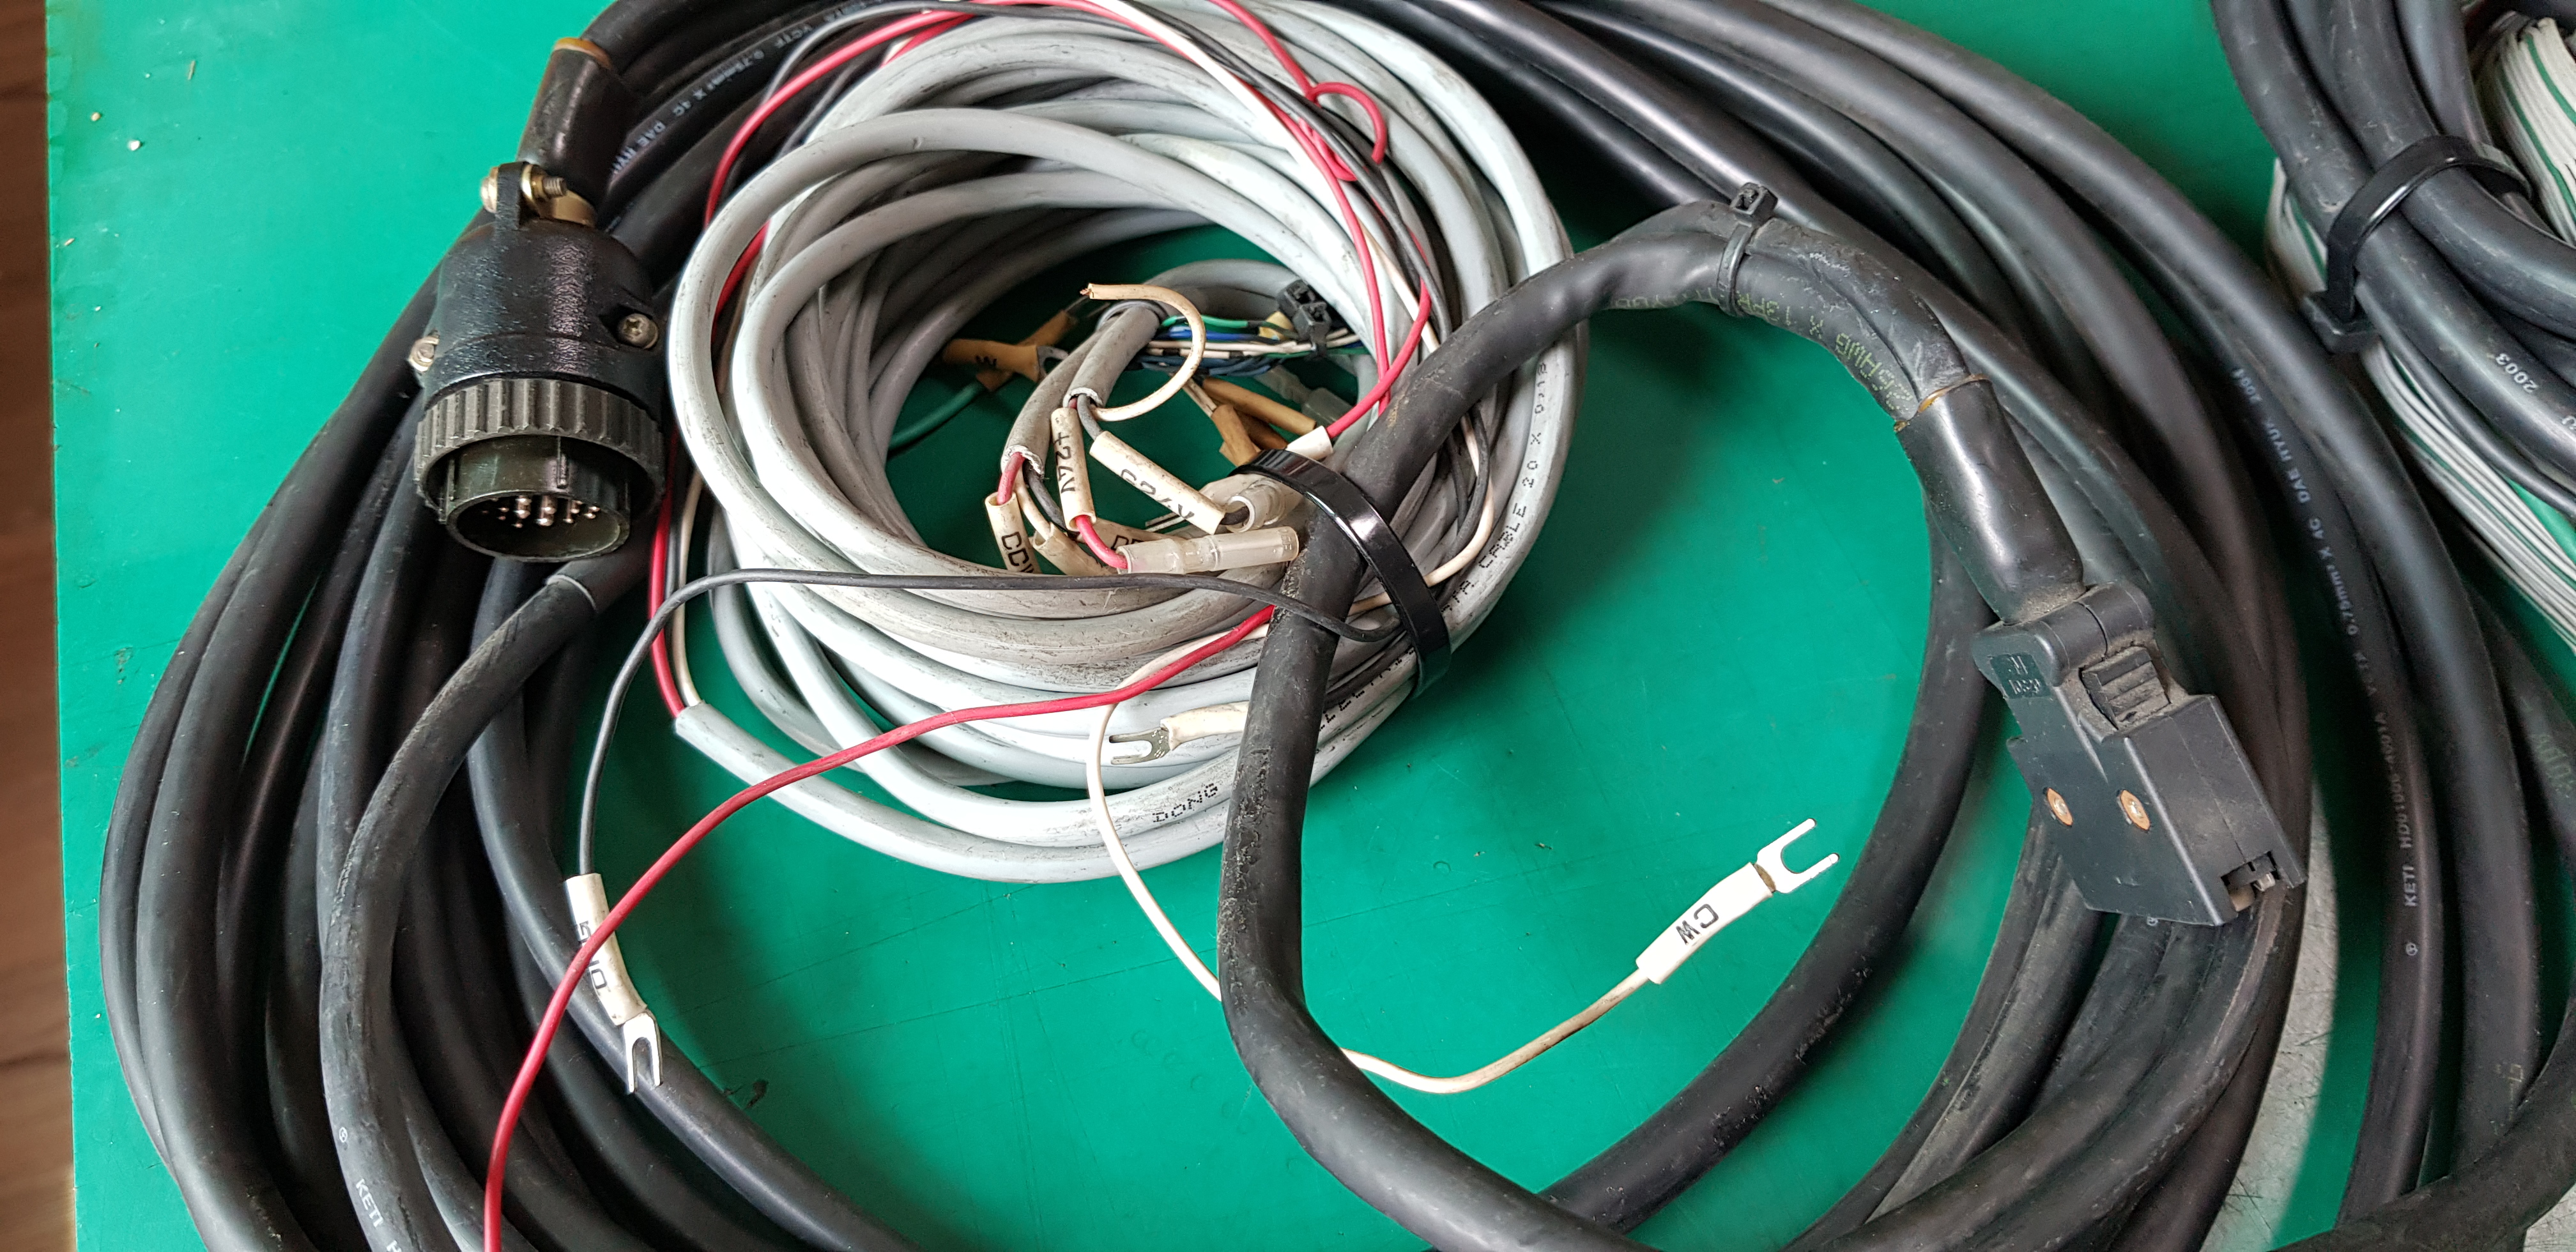 SERVO CABLE RCS-6002P 용 CABLE ASS'Y (중고)